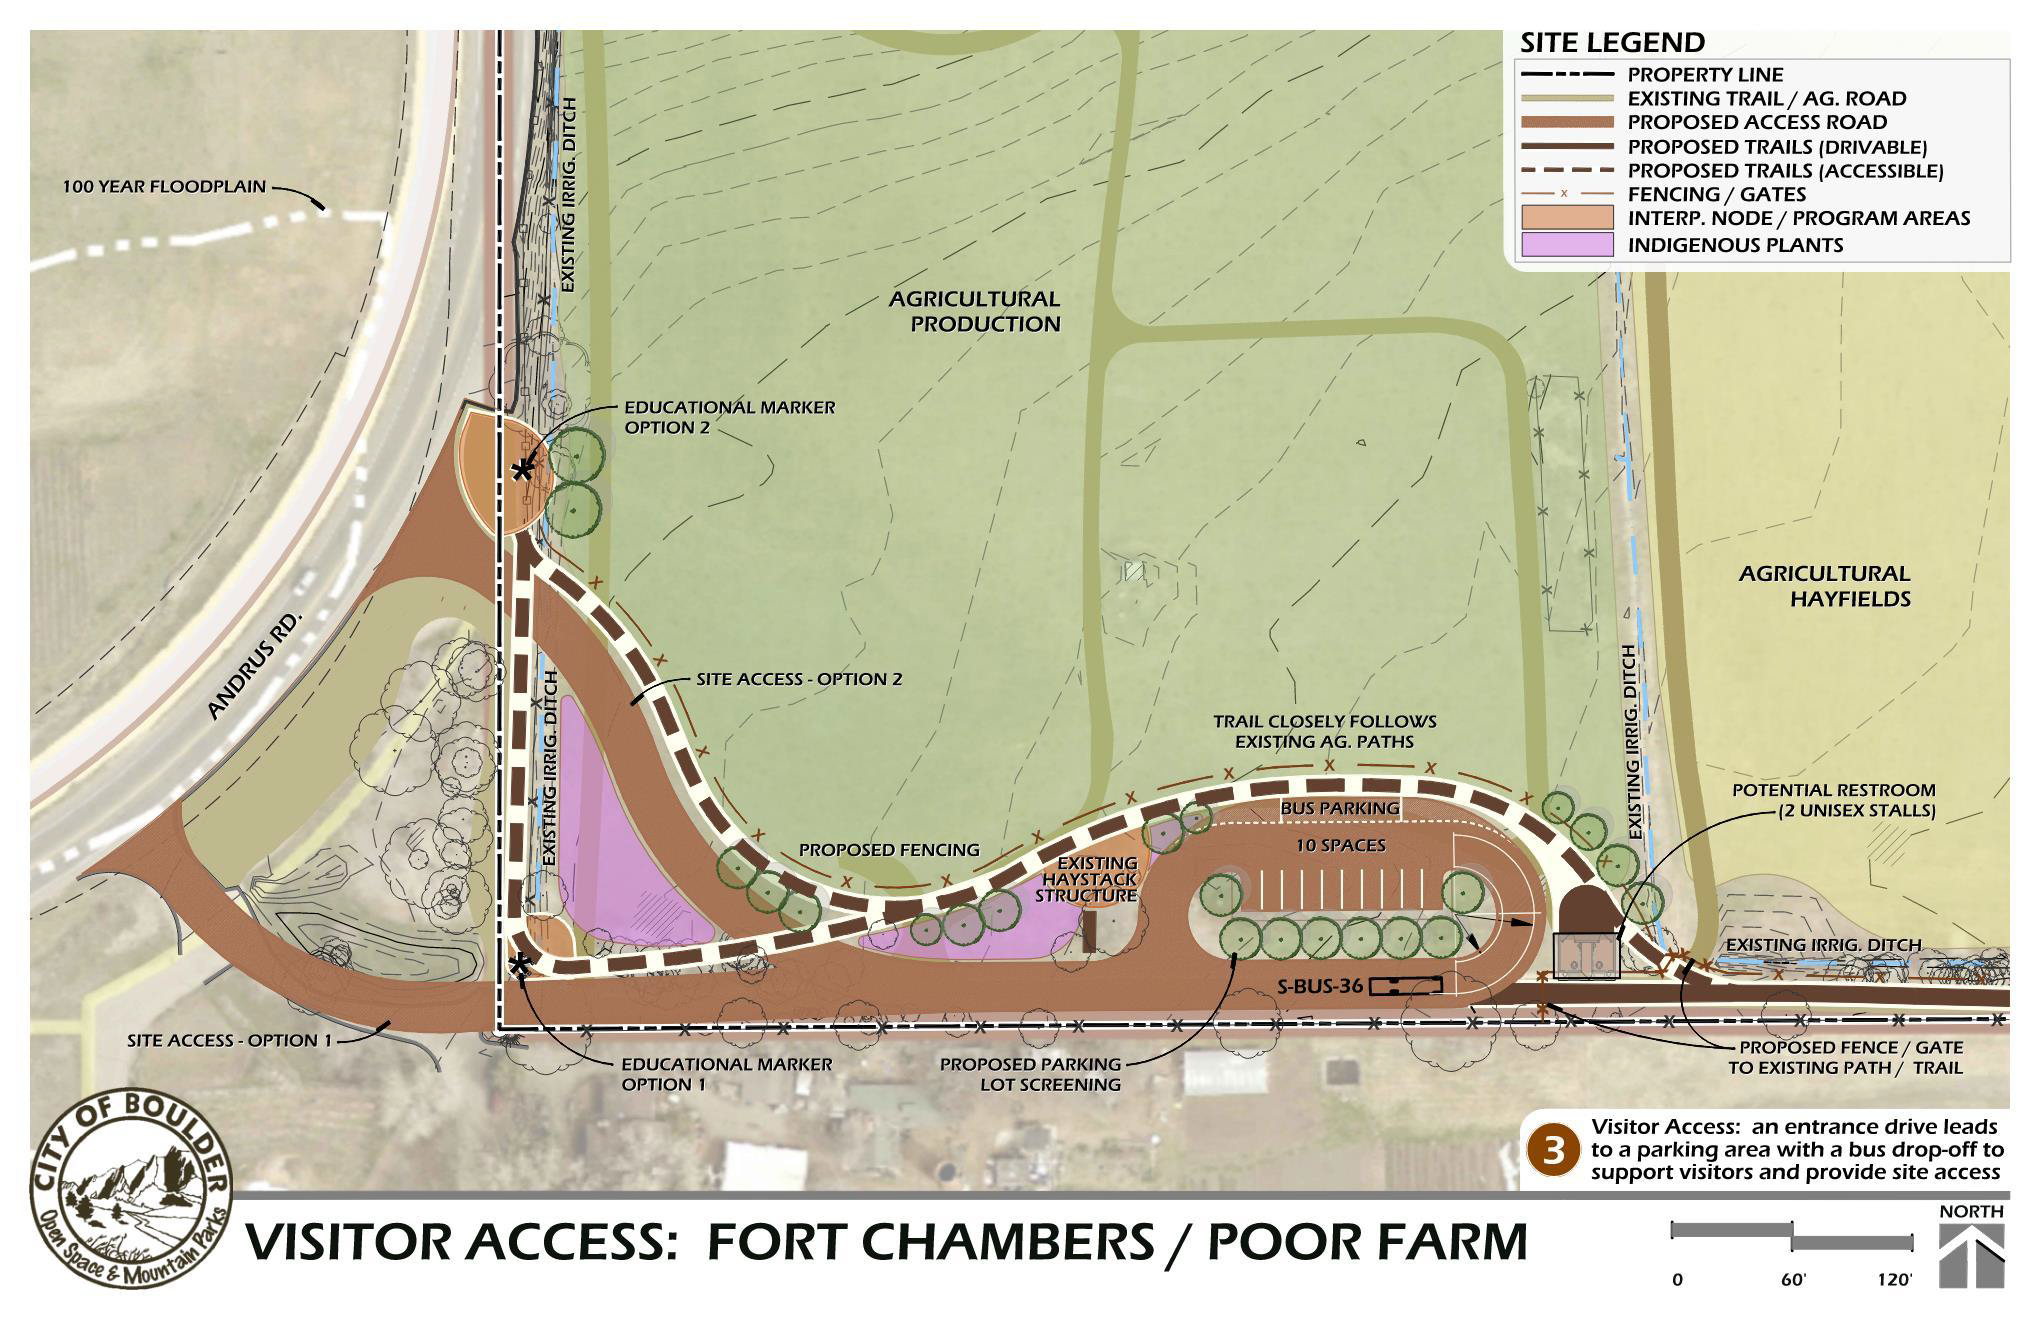 Access improvements map; details provided in caption